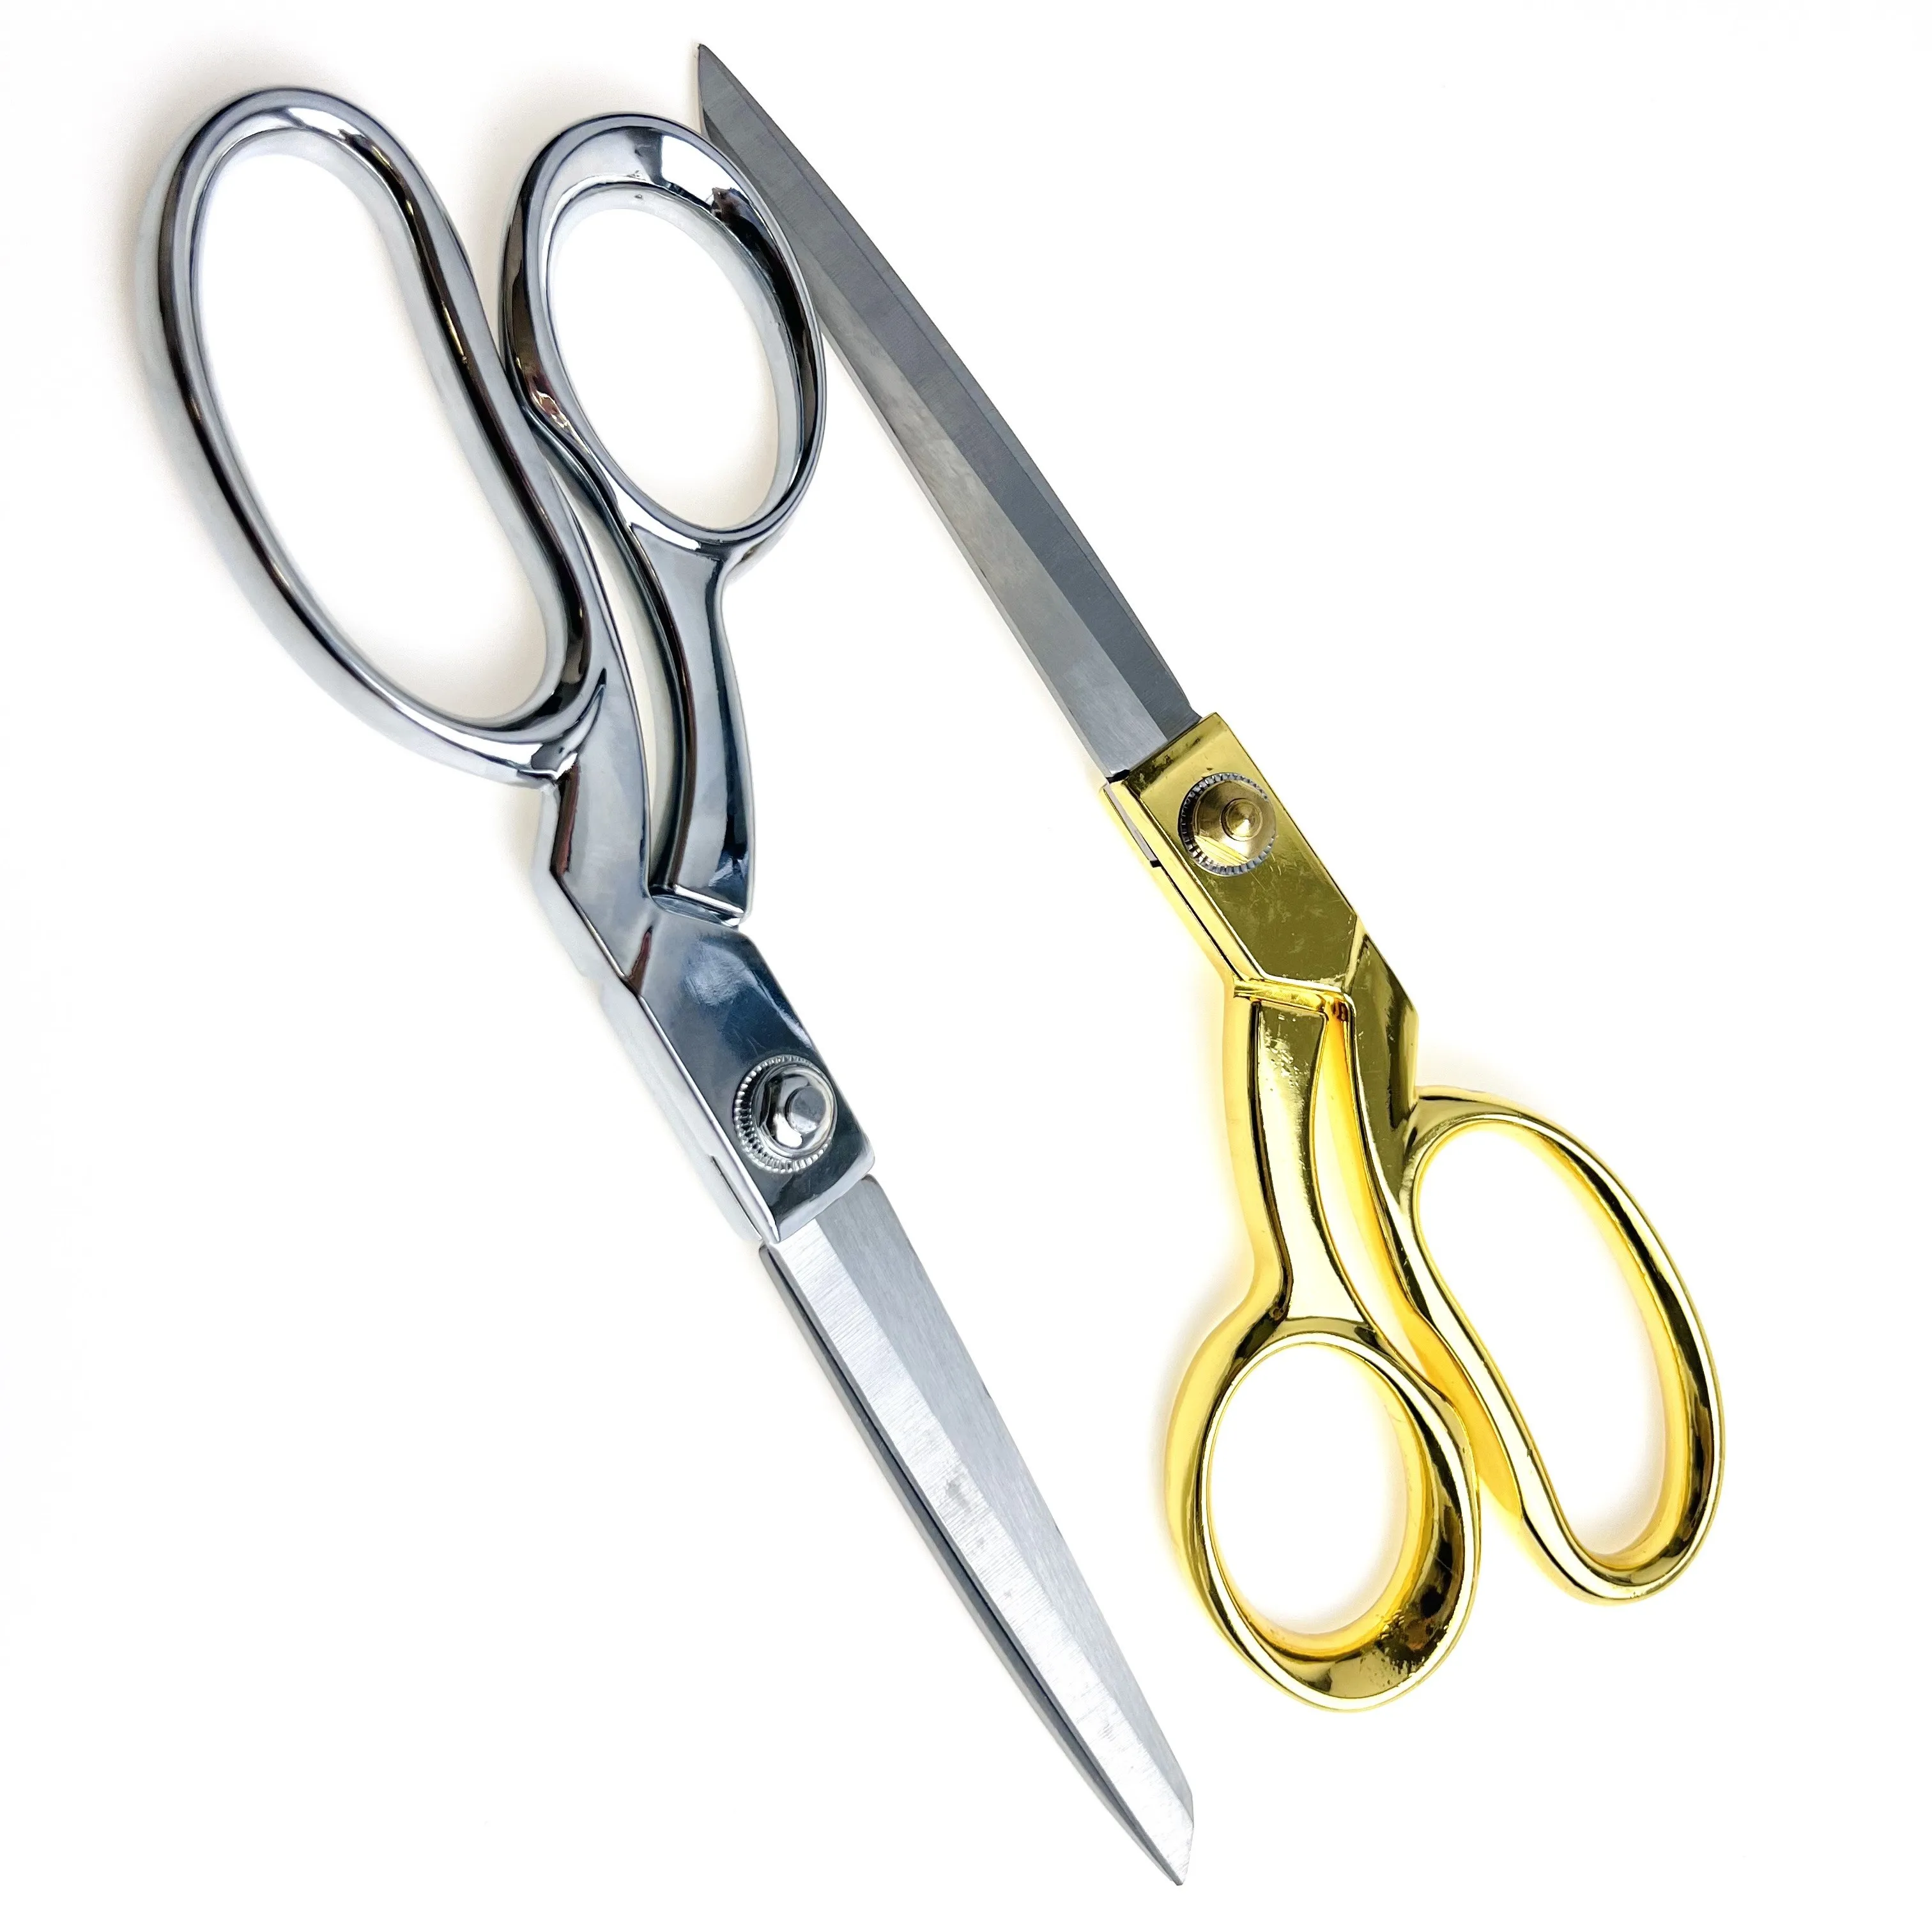 8.5 Inch Fabric Cutting Scissors Tailor Scissors Sewing Scissors High  Quality Stainless Steel For Online Sale - Buy 8.5 Inch Fabric Cutting  Scissors Tailor Scissors Sewing Scissors High Quality Stainless Steel For